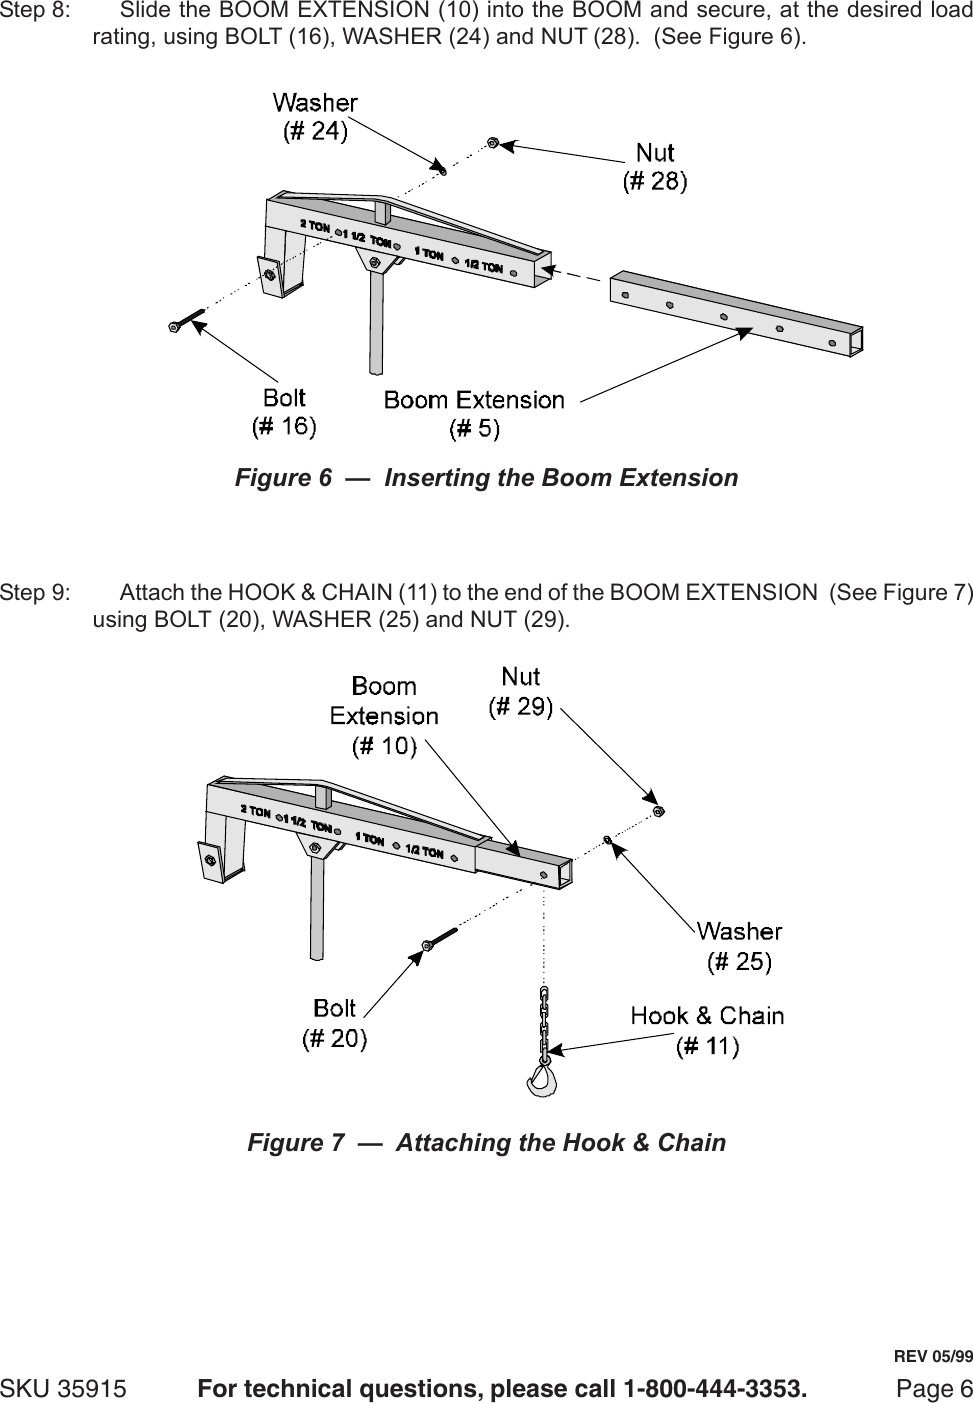 Page 6 of 11 - Central-Hydraulics Central-Hydraulics-2-Ton-Foldable-Shop-Crane-35915-Users-Manual- 35915 Jack Manual  Central-hydraulics-2-ton-foldable-shop-crane-35915-users-manual